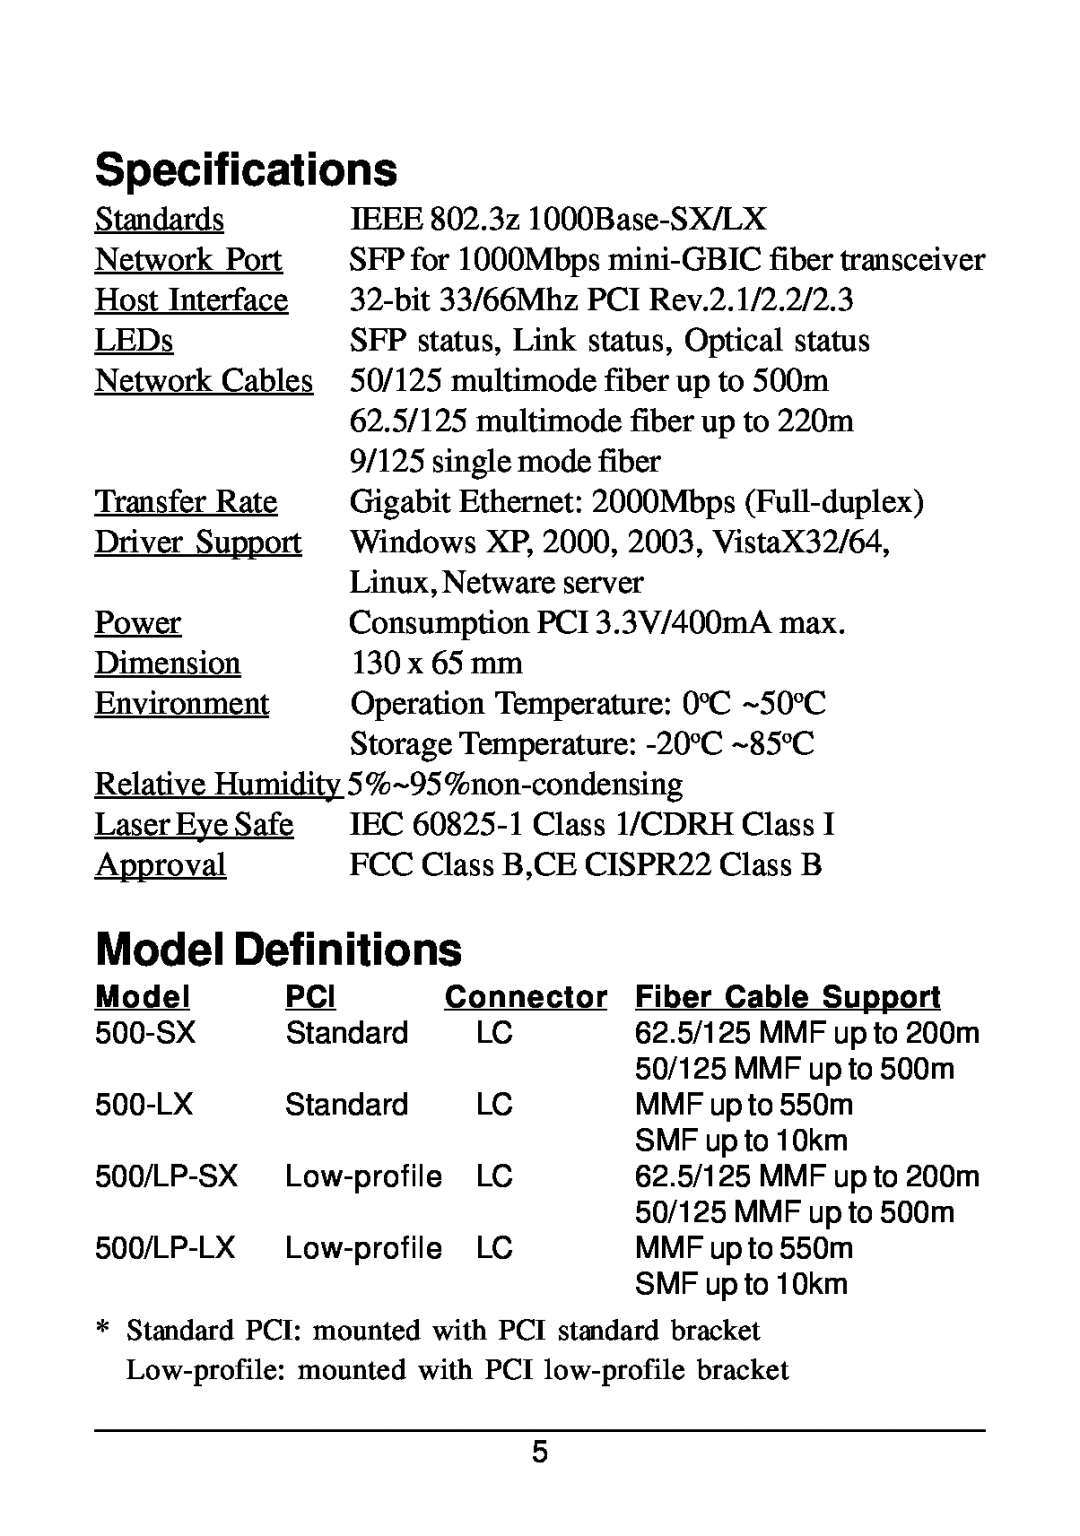 KTI Networks KG-500F manual Specifications, Model Definitions 